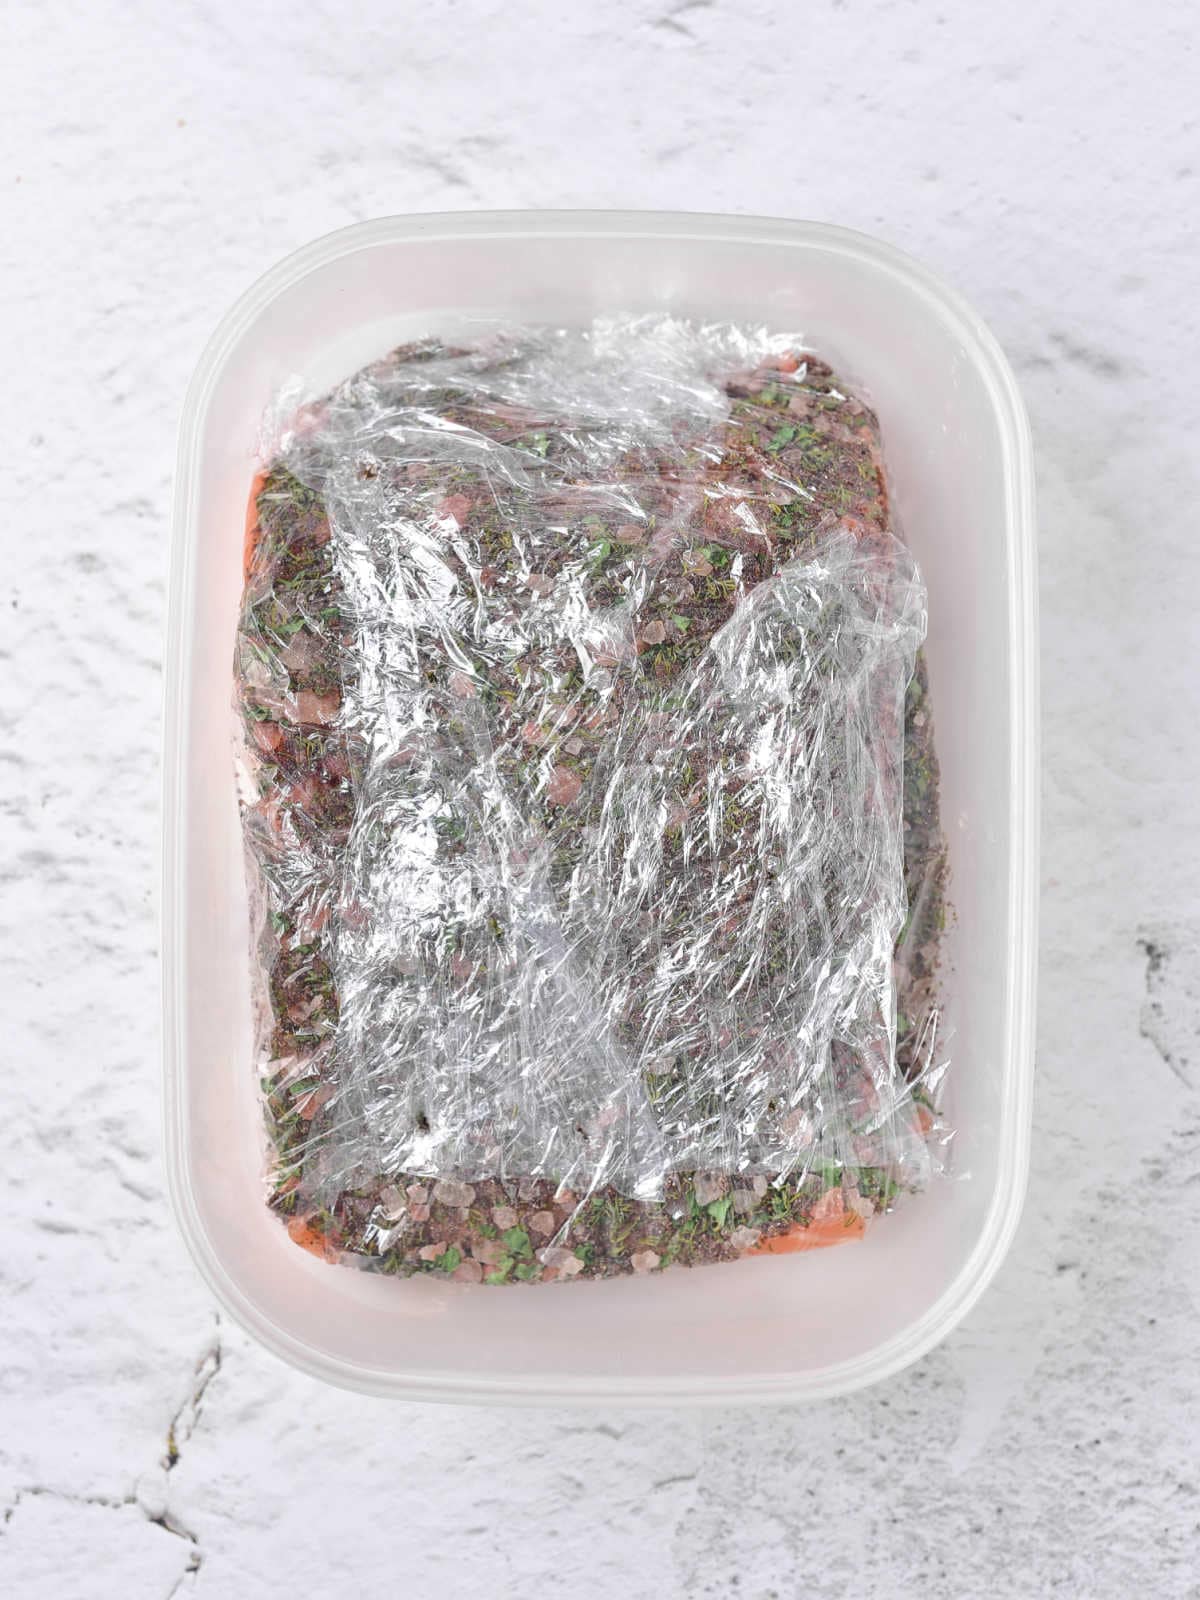 Light gray surface with white baking dish containing plastic-wrapped salt-crusted salmon piece.